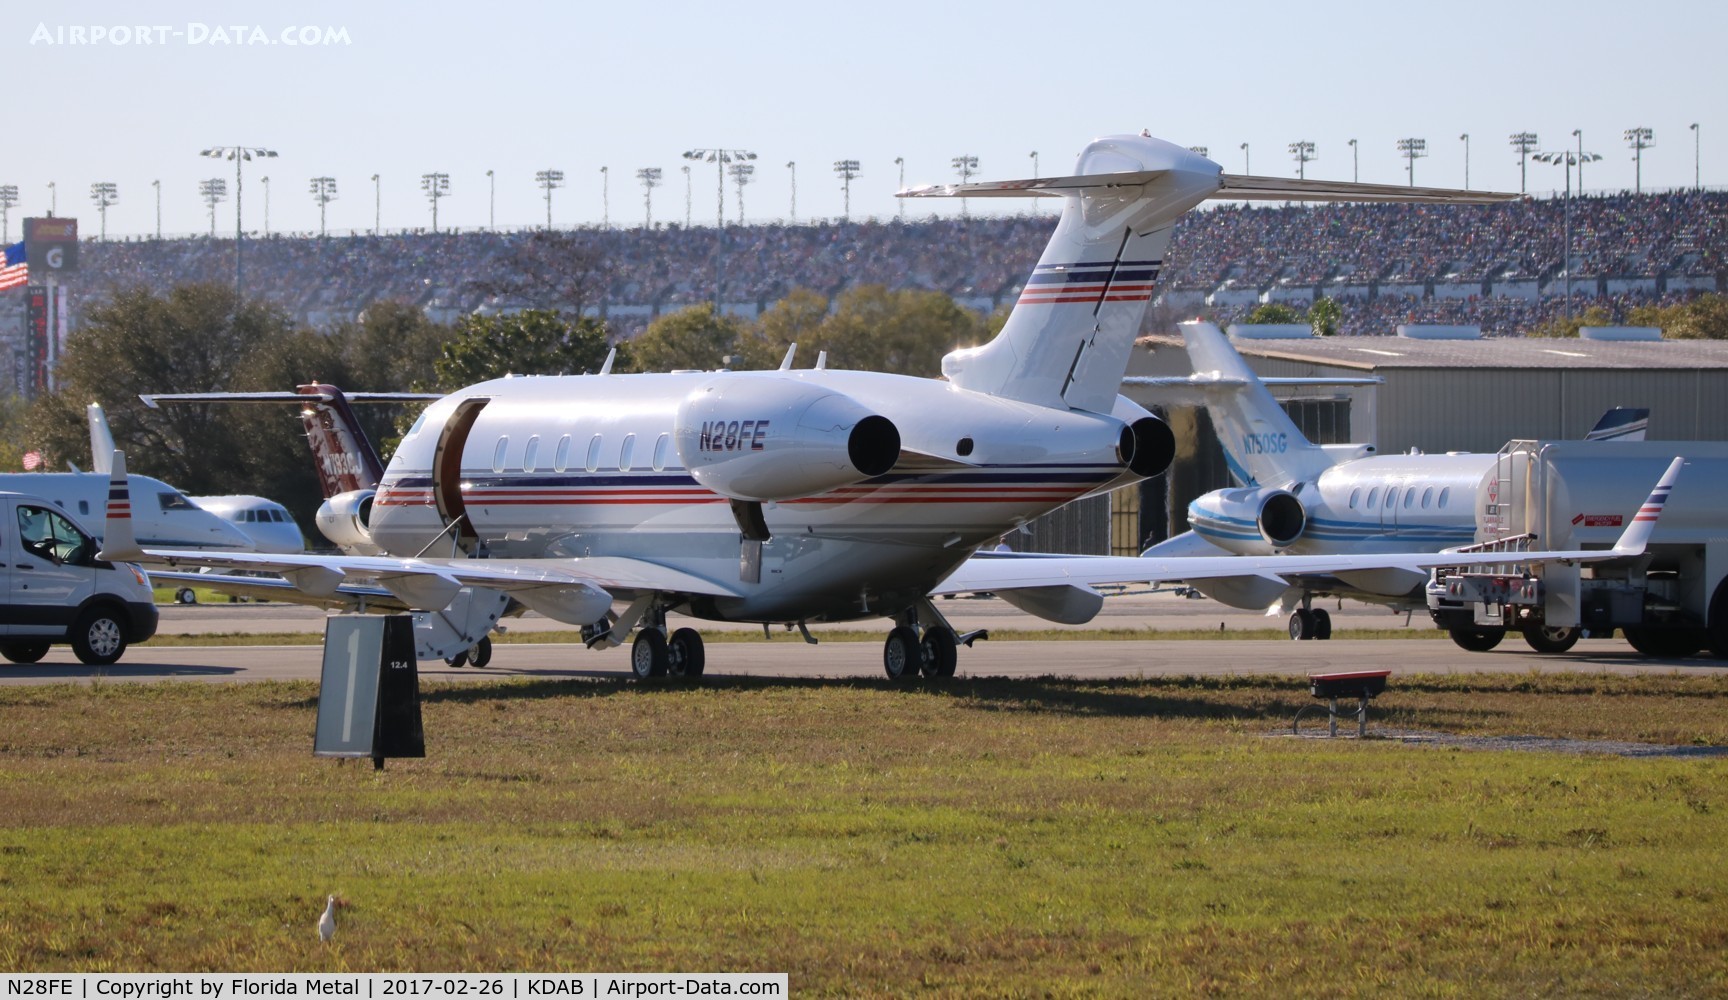 N28FE, 2012 Bombardier Challenger 300 (BD-100-1A10) C/N 20361, Challenger 300 zx